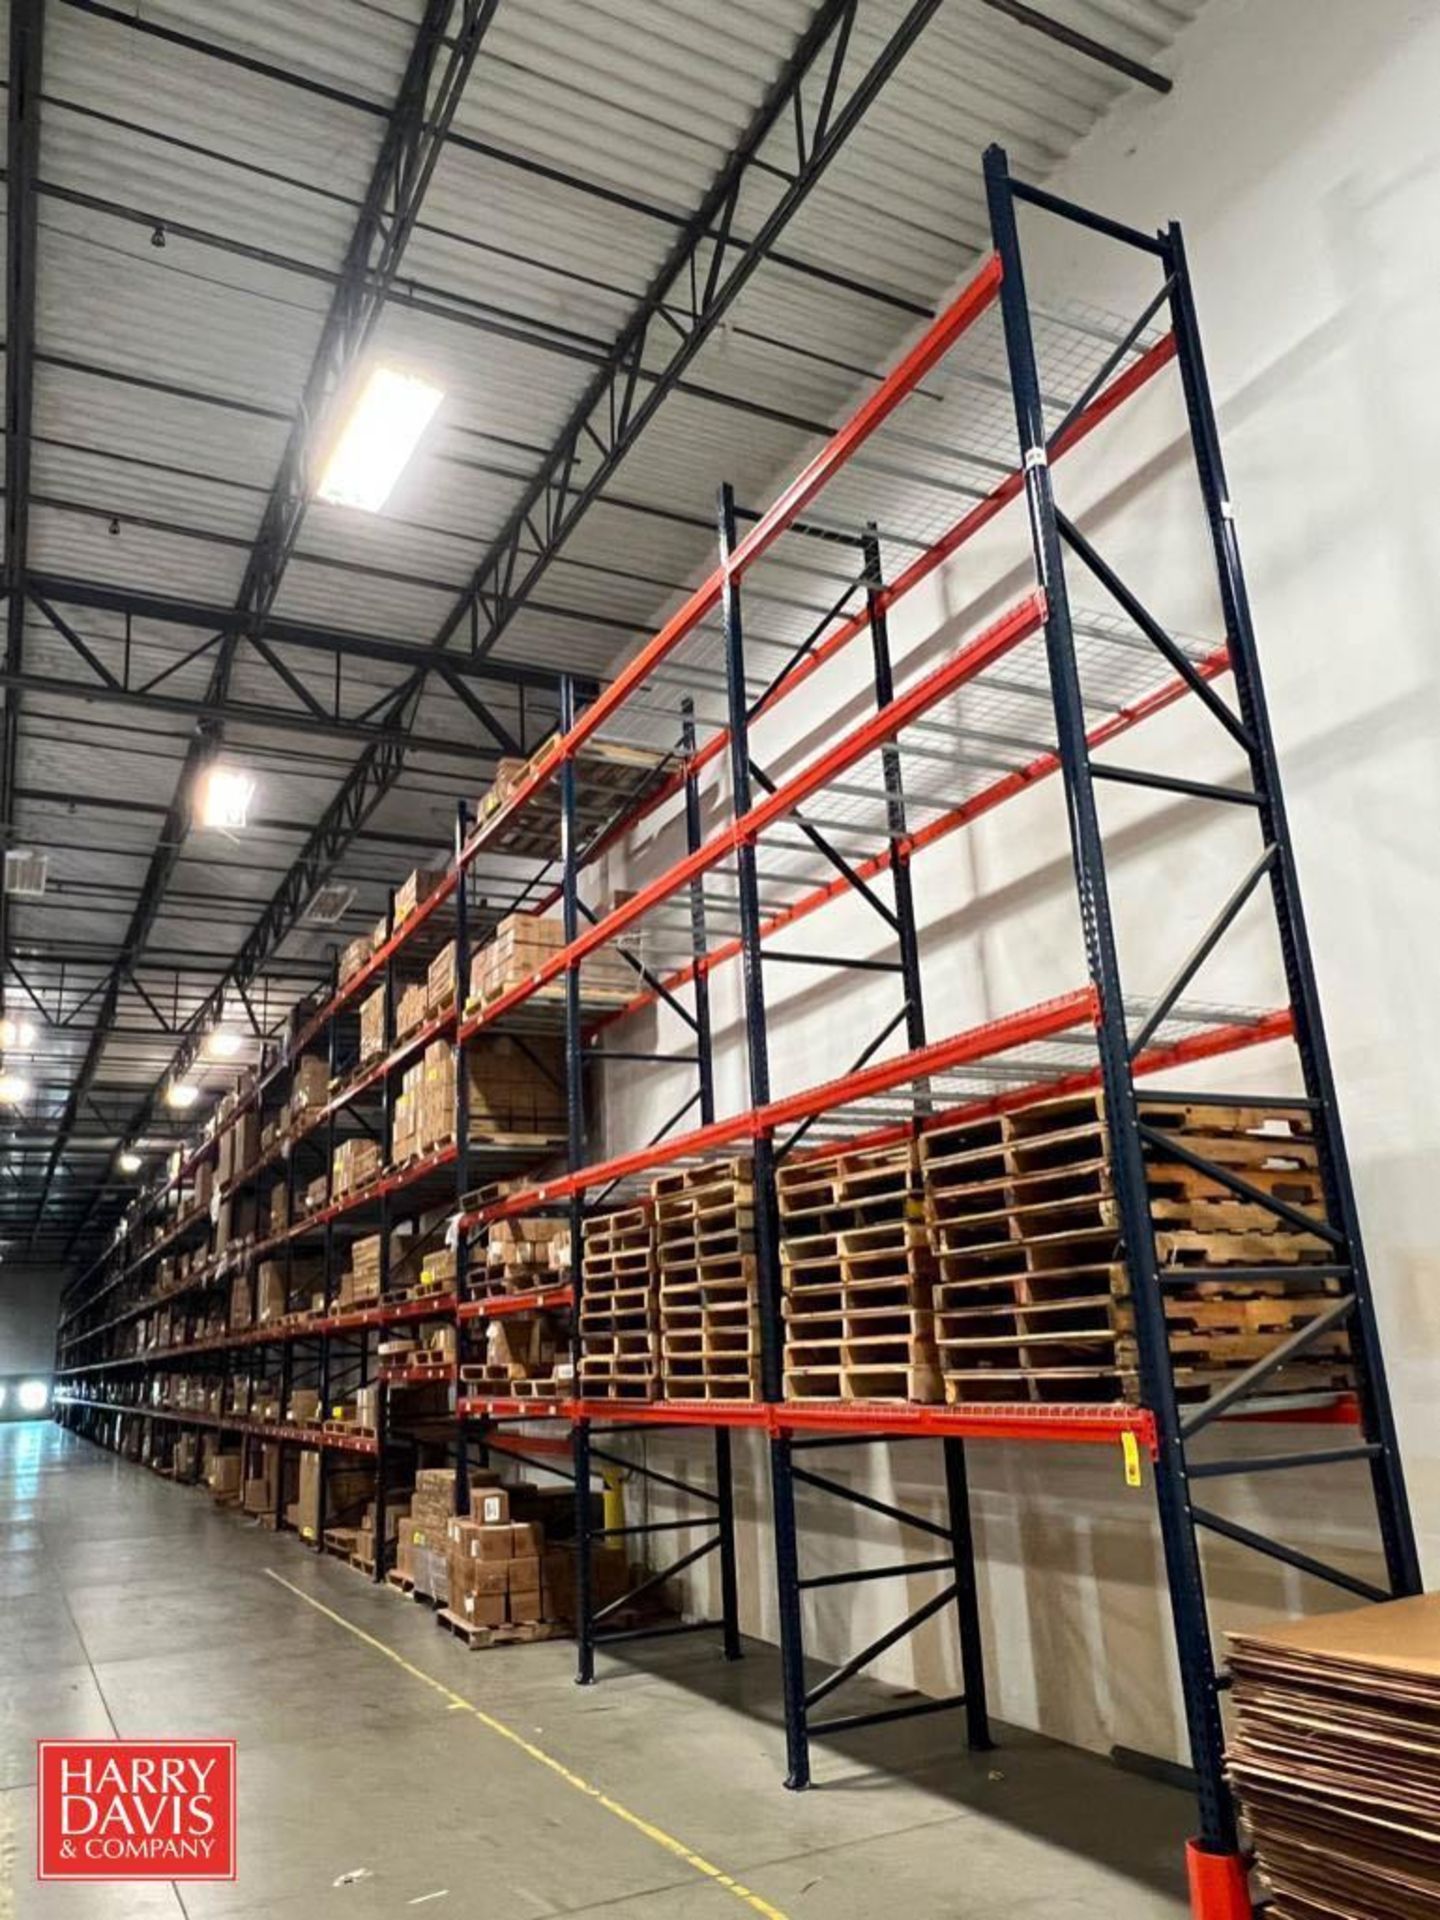 Sections Pallet Racking, Dimensions = 21' Height x 8' Width - Rigging Fee: Contact HDC